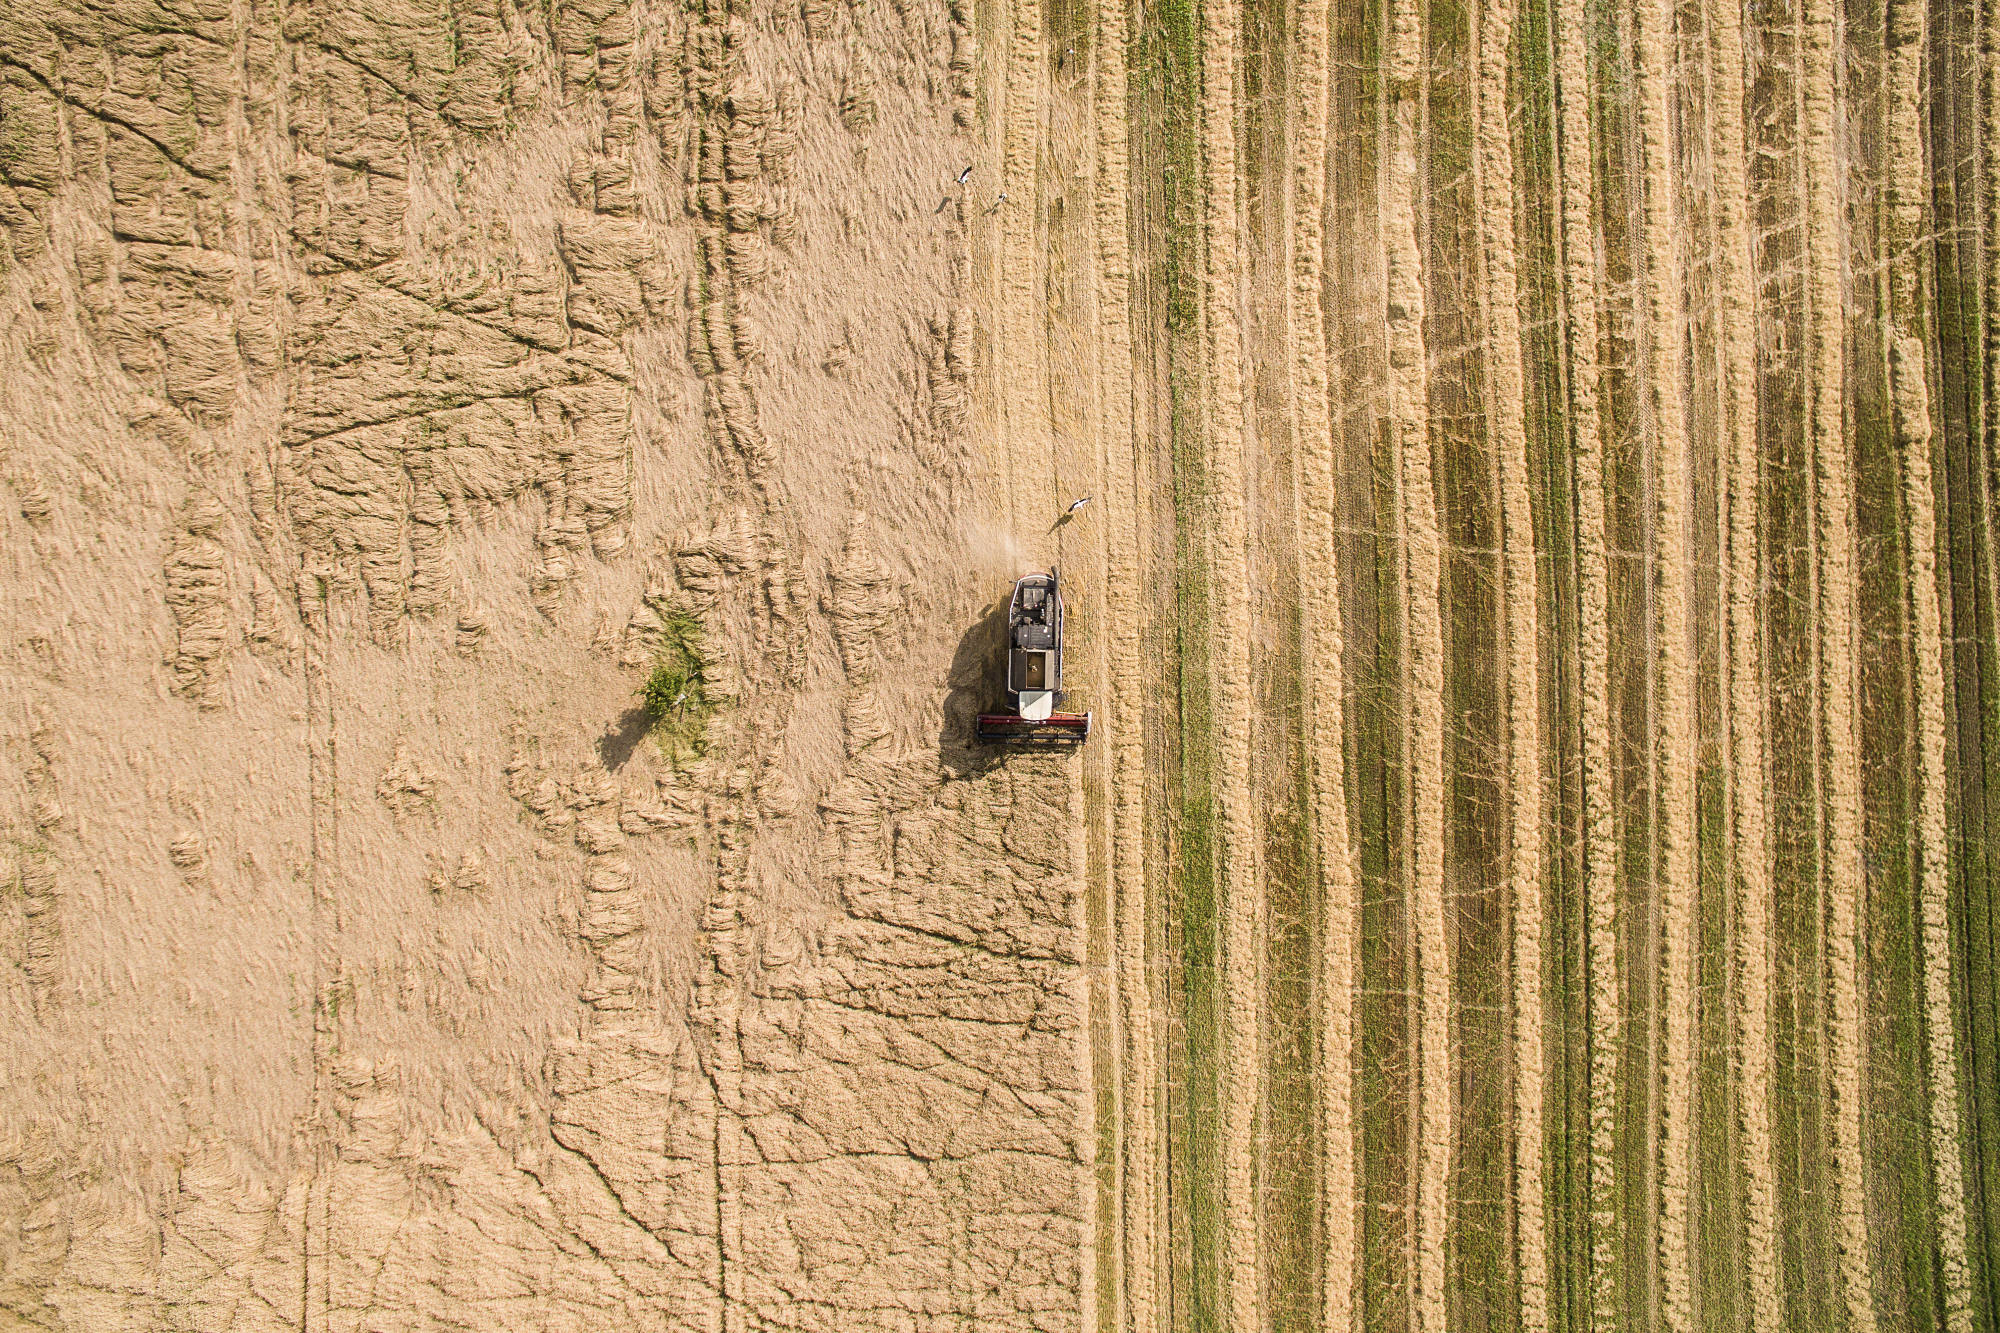 A combine harvester drives through a field of wheat during the summer harvest in&nbsp;Hungary